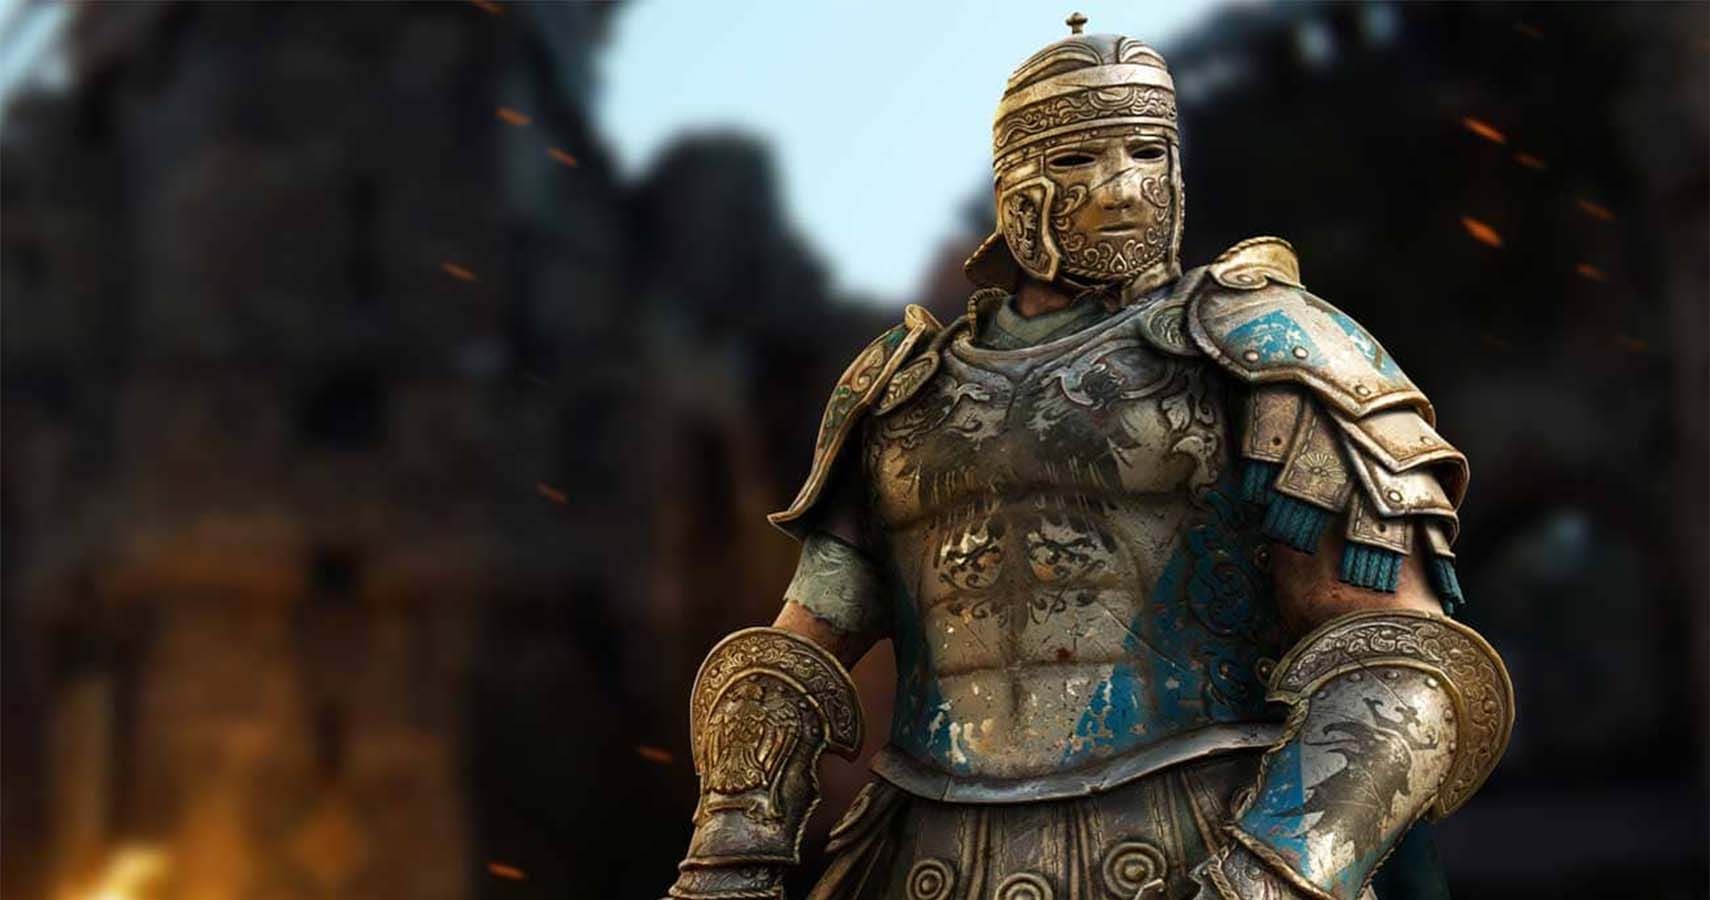 For Honor 10 Tips To Make You The Most Feared Centurion In A Match